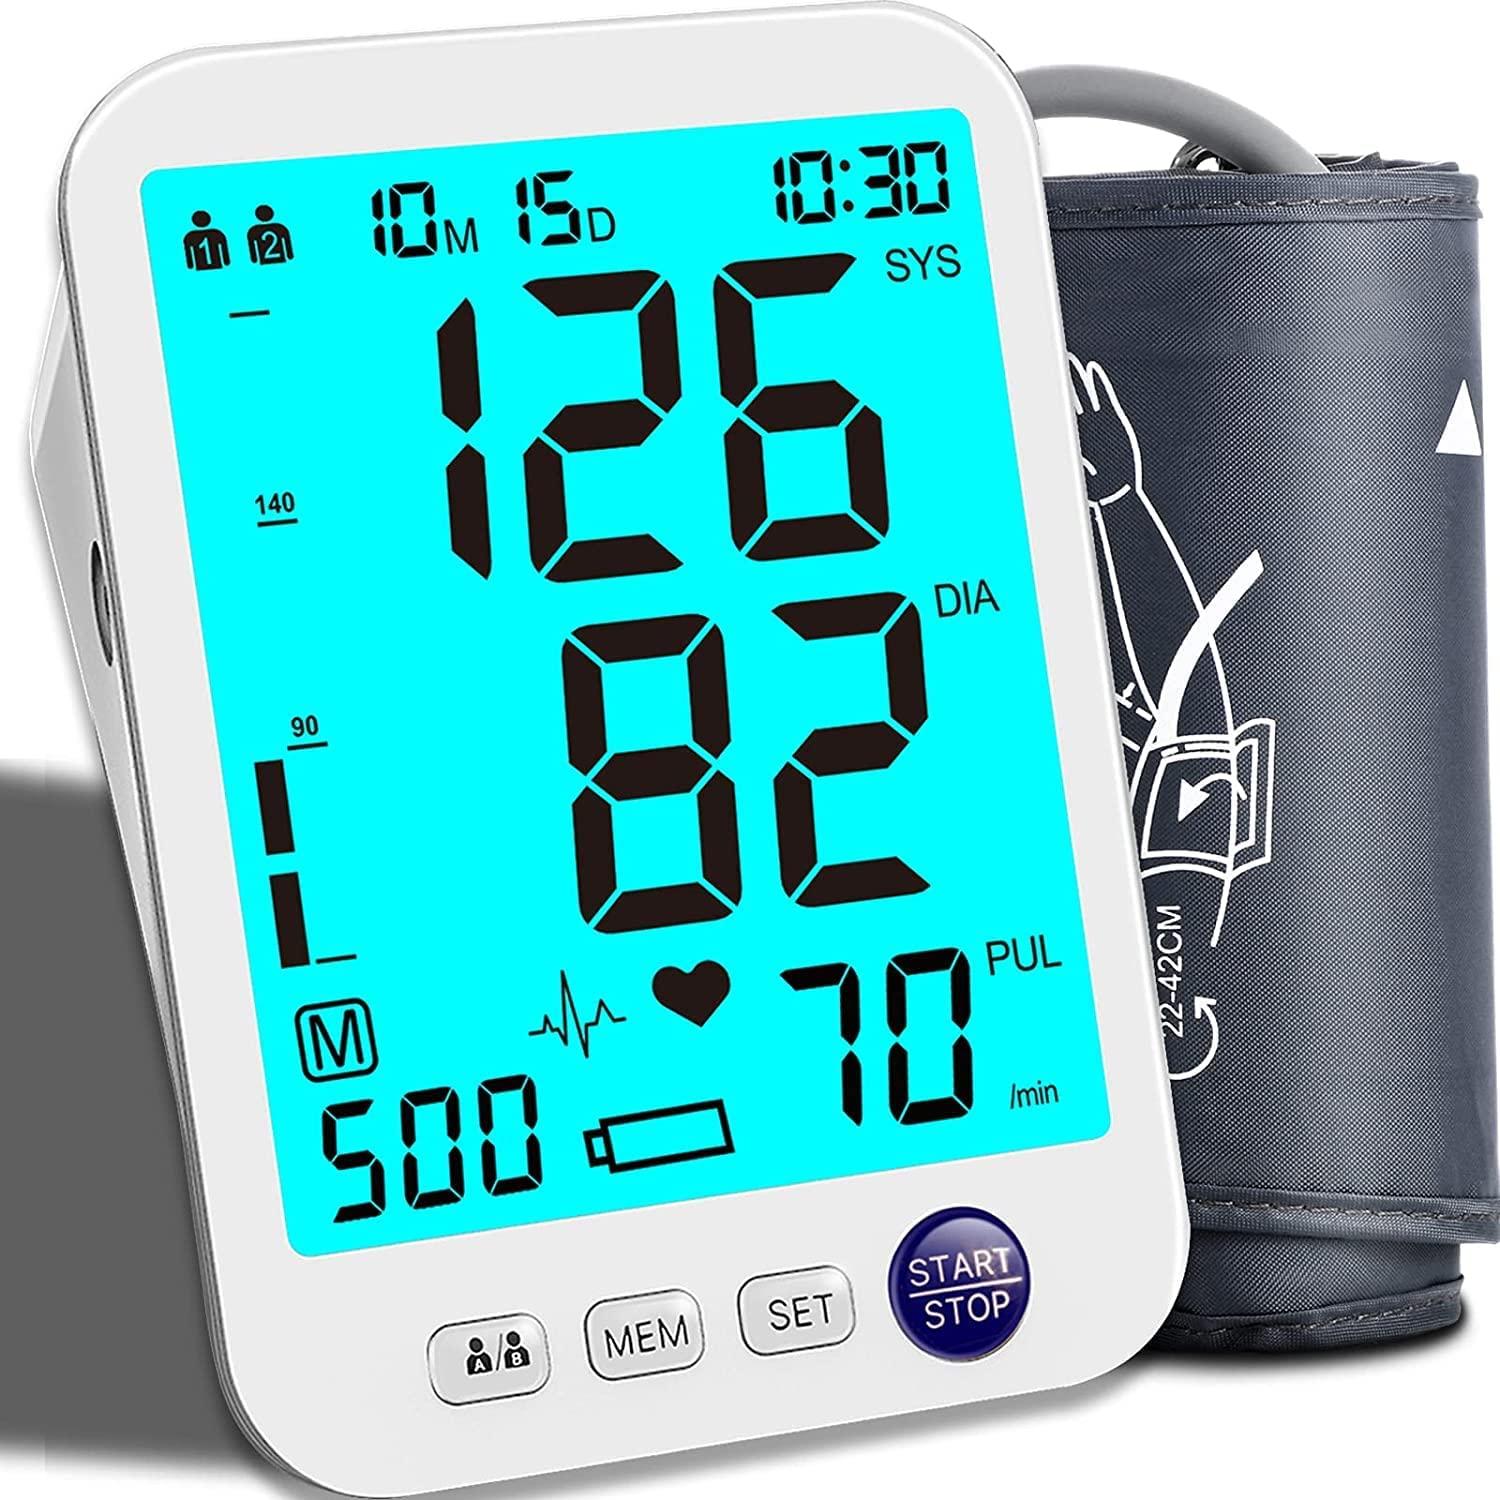  2 Size Cuffs Arm Blood Pressure Machine, Bundled with Wall Plug  5V 1000mAh, Including 2 Cuffs Medium/Large 9-17 and Extra Large 13-21  Sizes, Accurate Automatic Digital BP Monitor 2-User 1000 Mem 